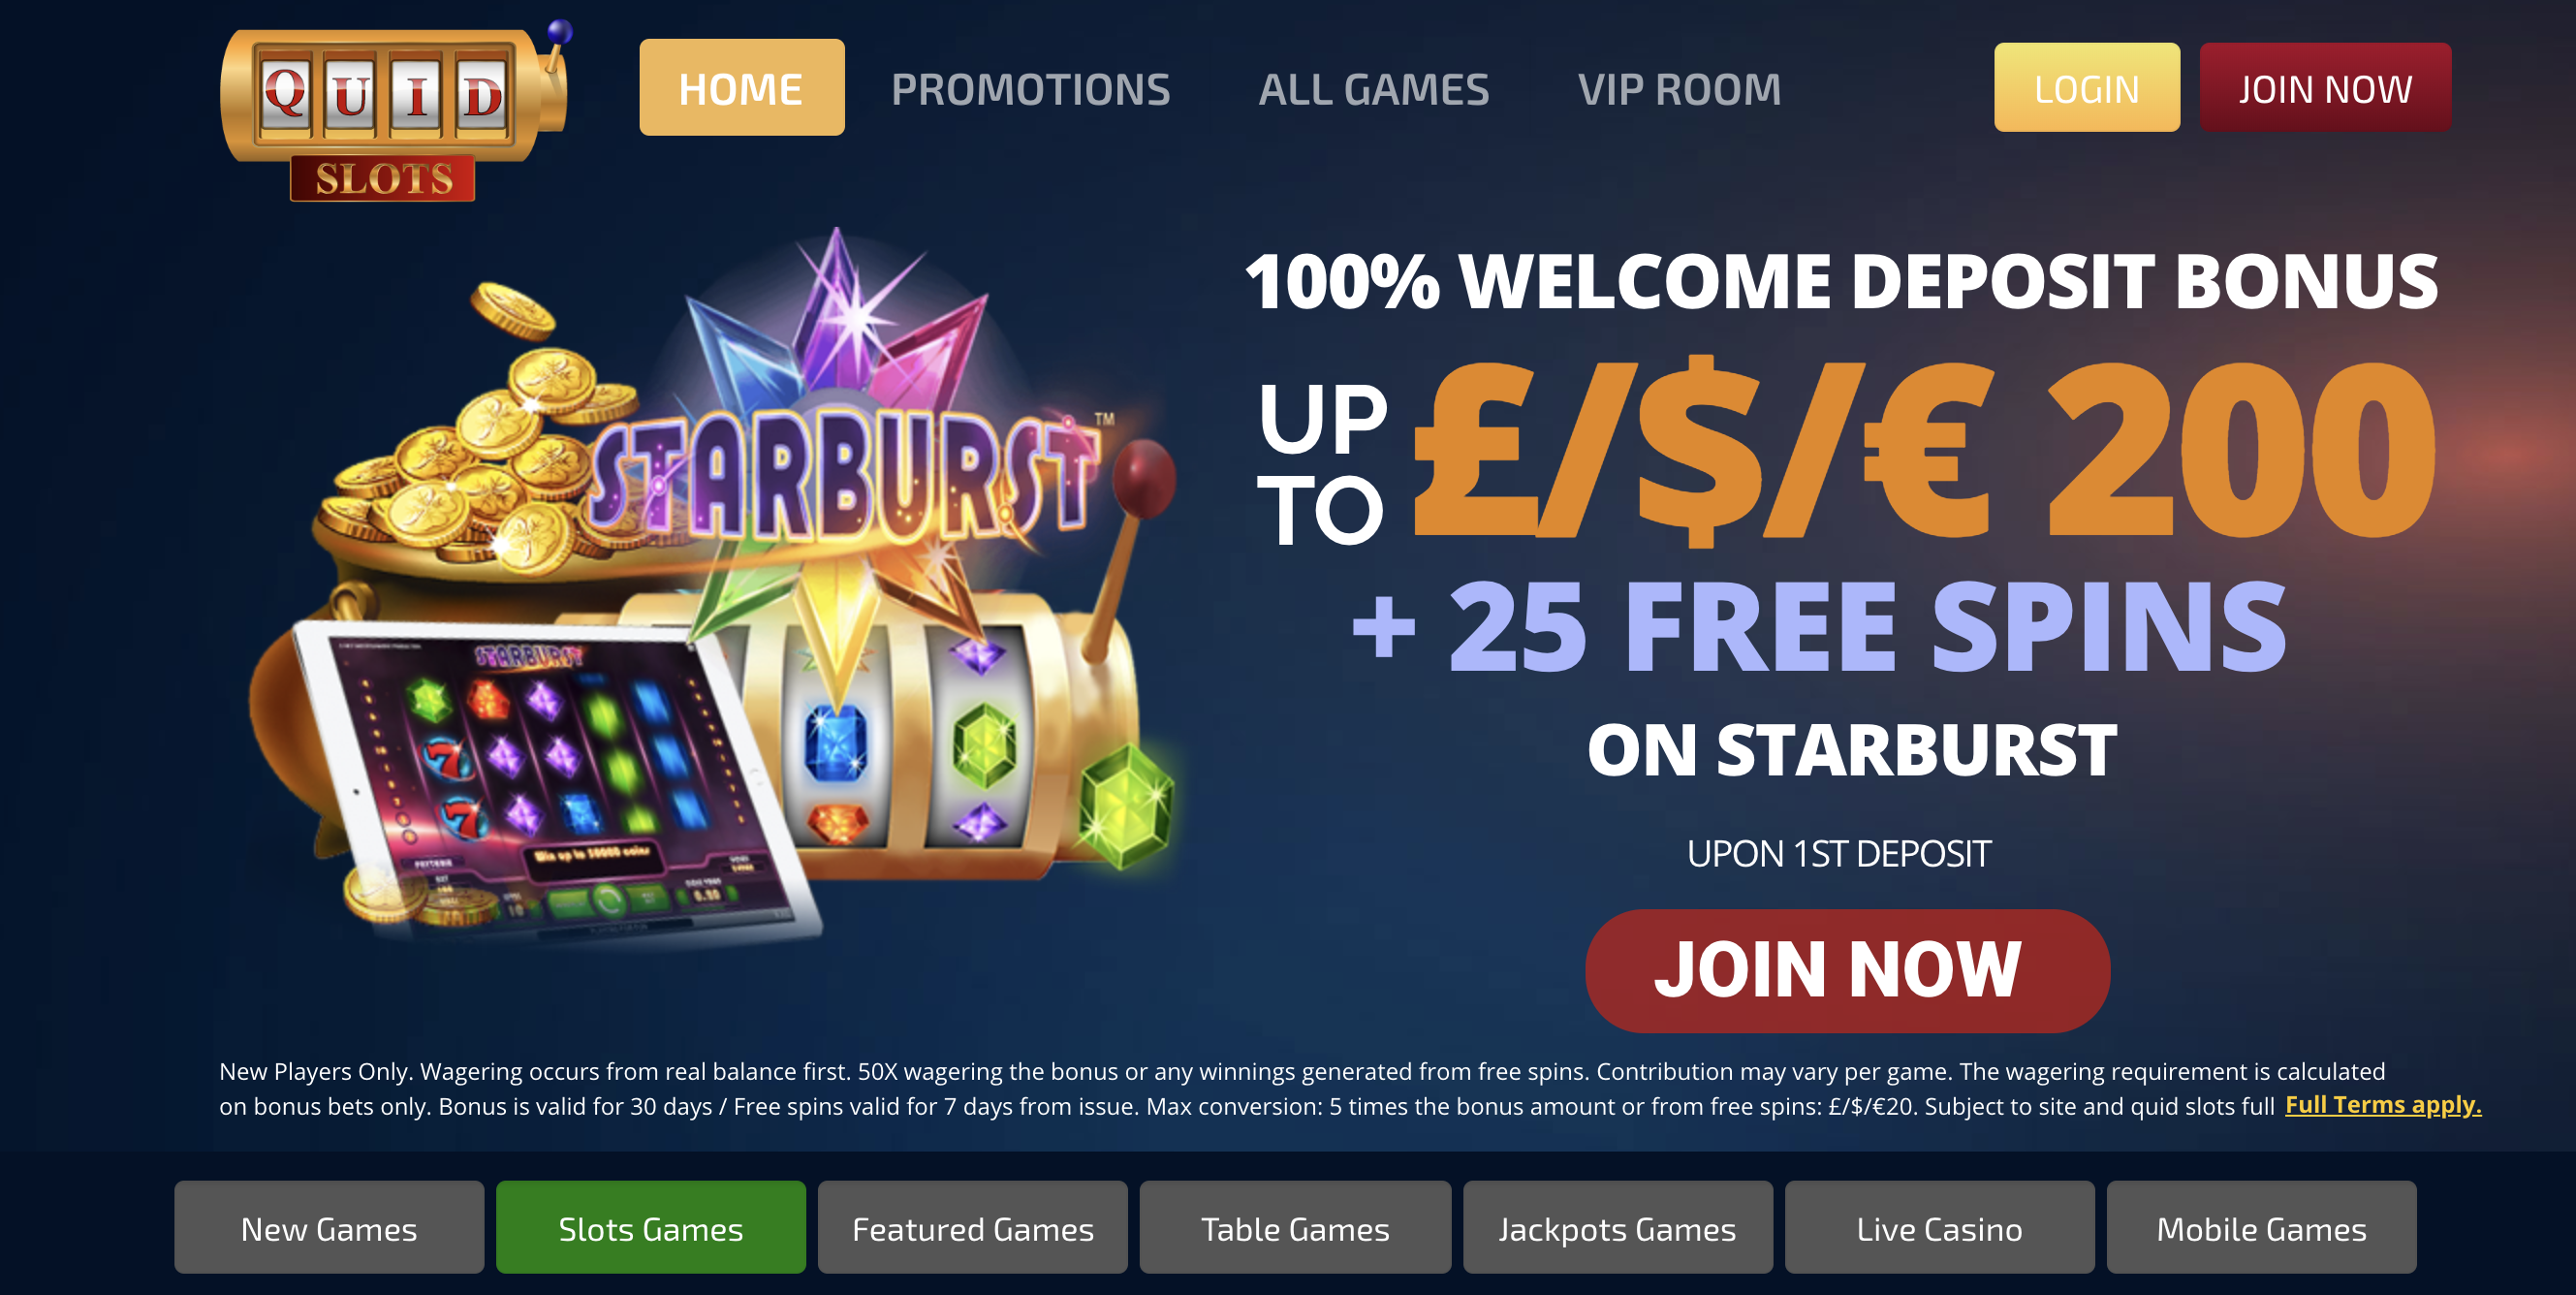 How to choose best slot games online?